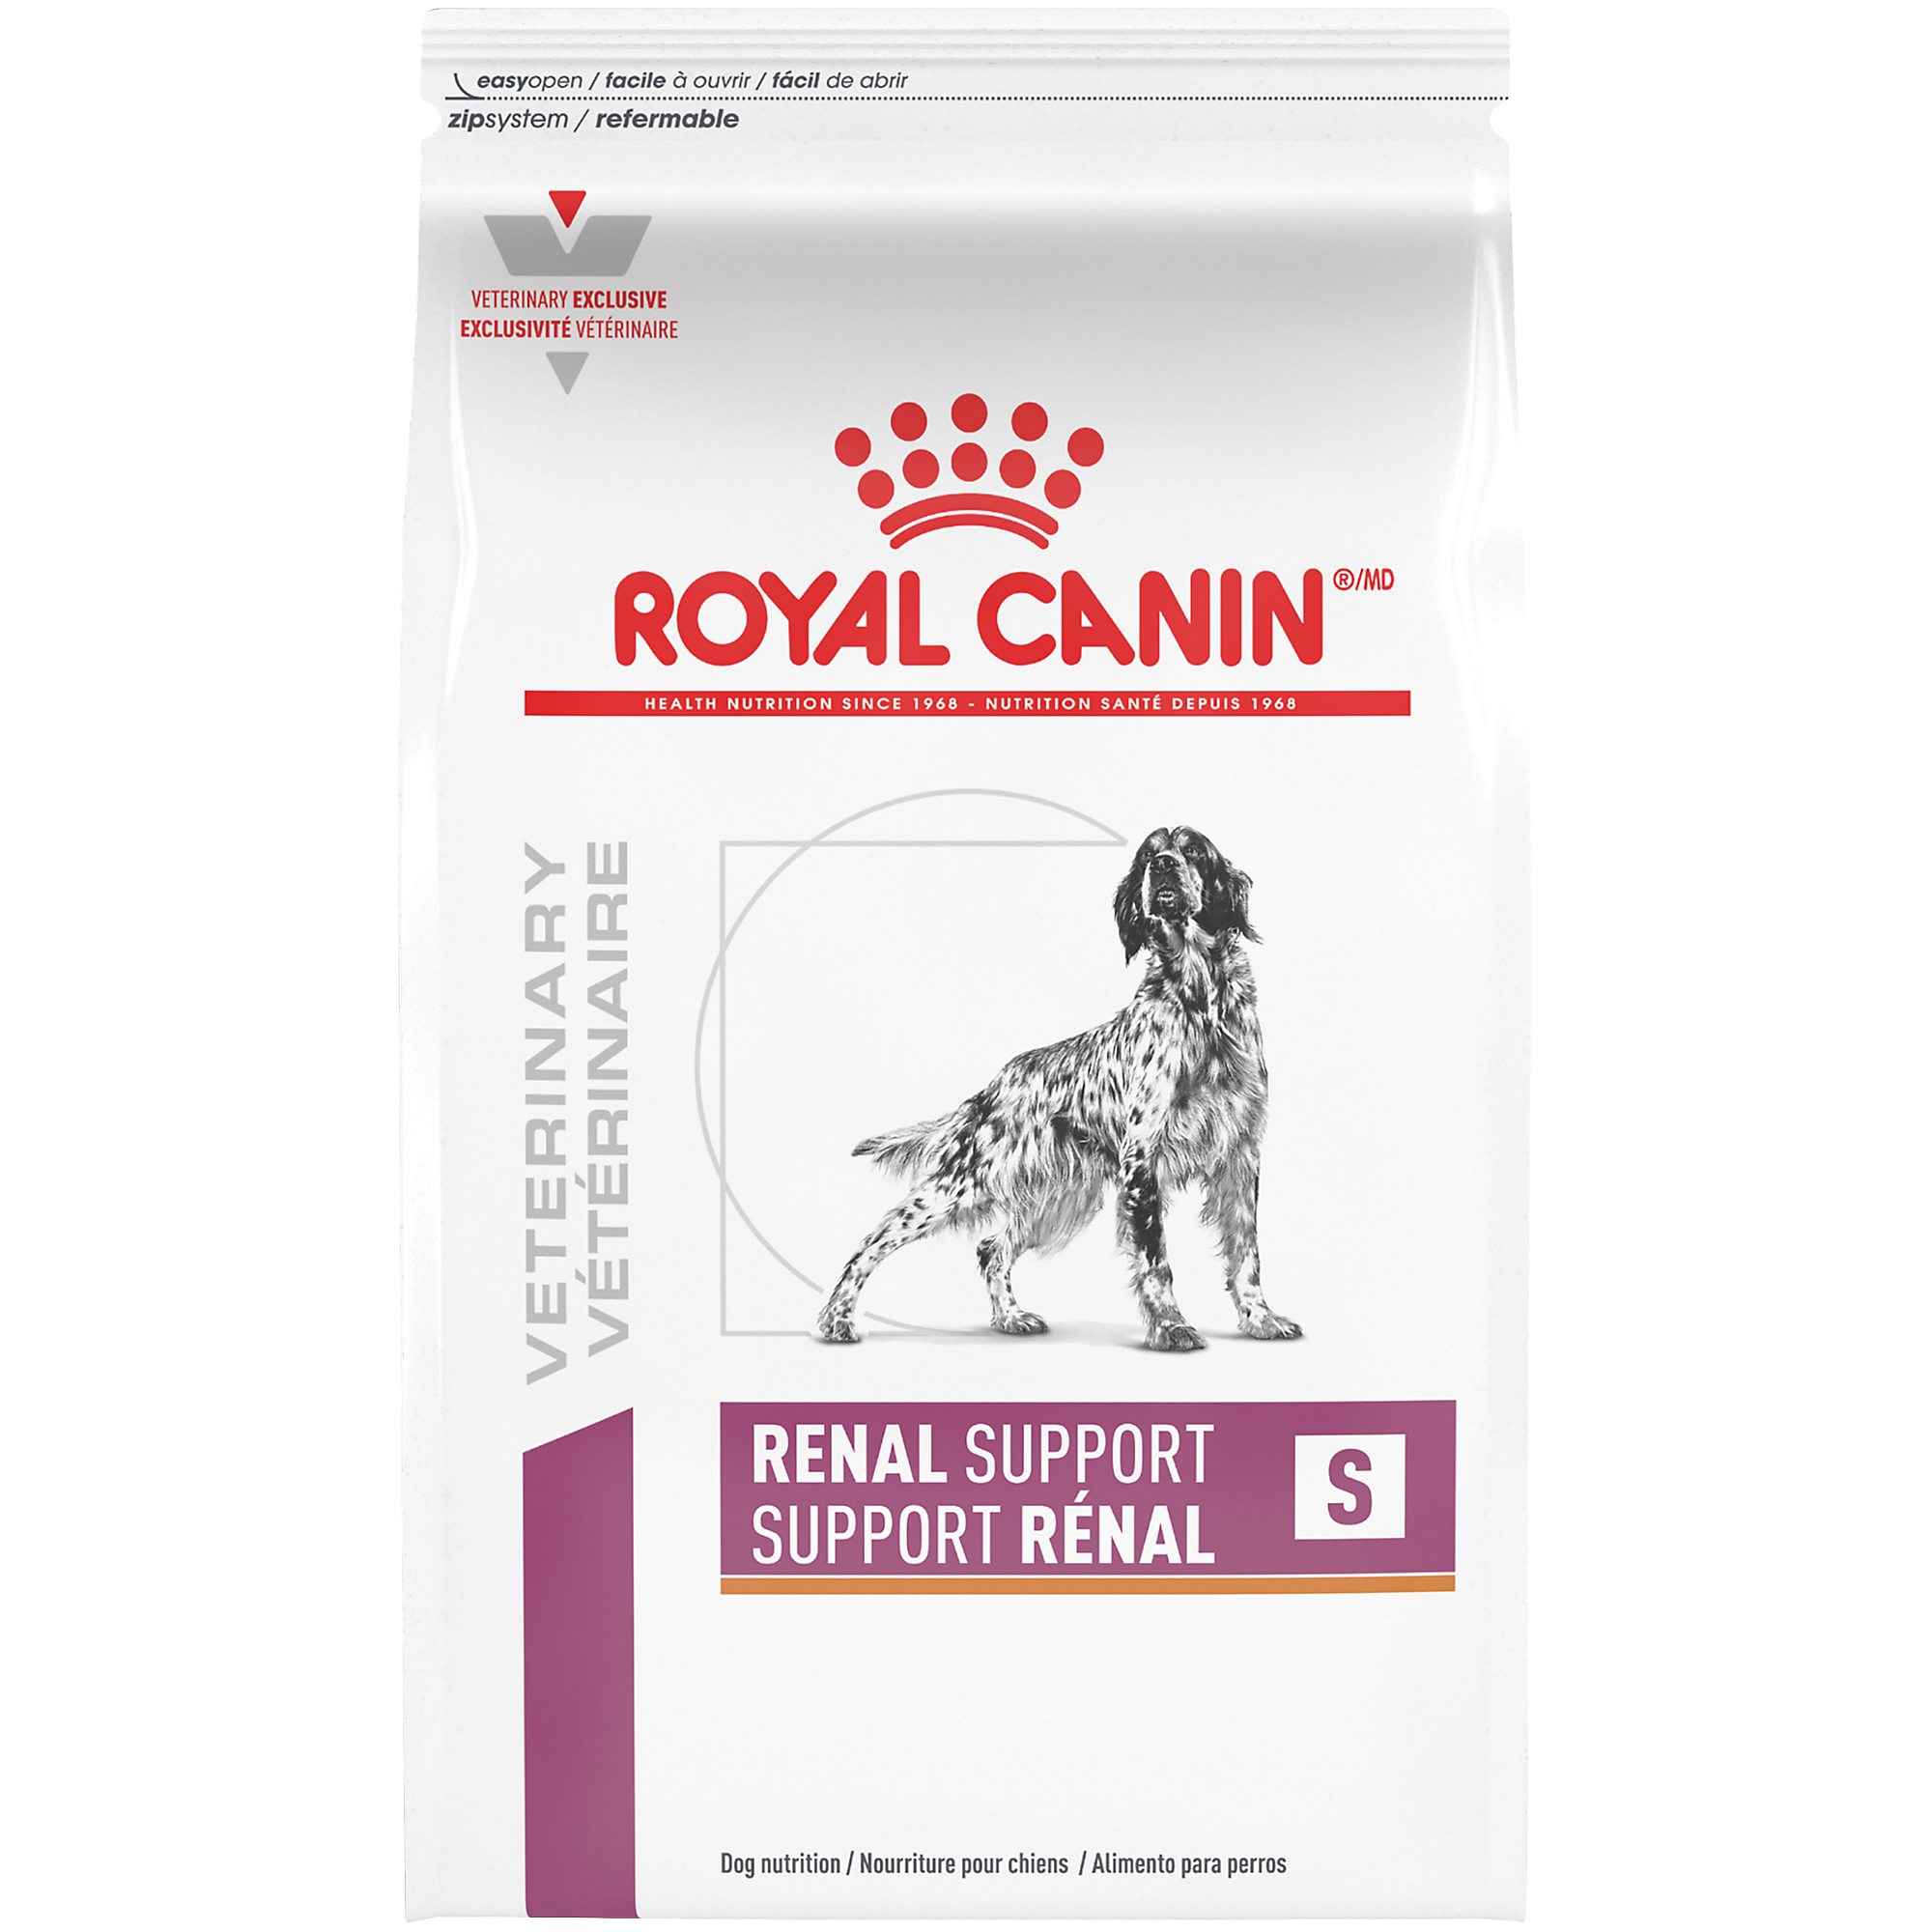 Canine Renal Support S Dry Dog Food - Royal Canin